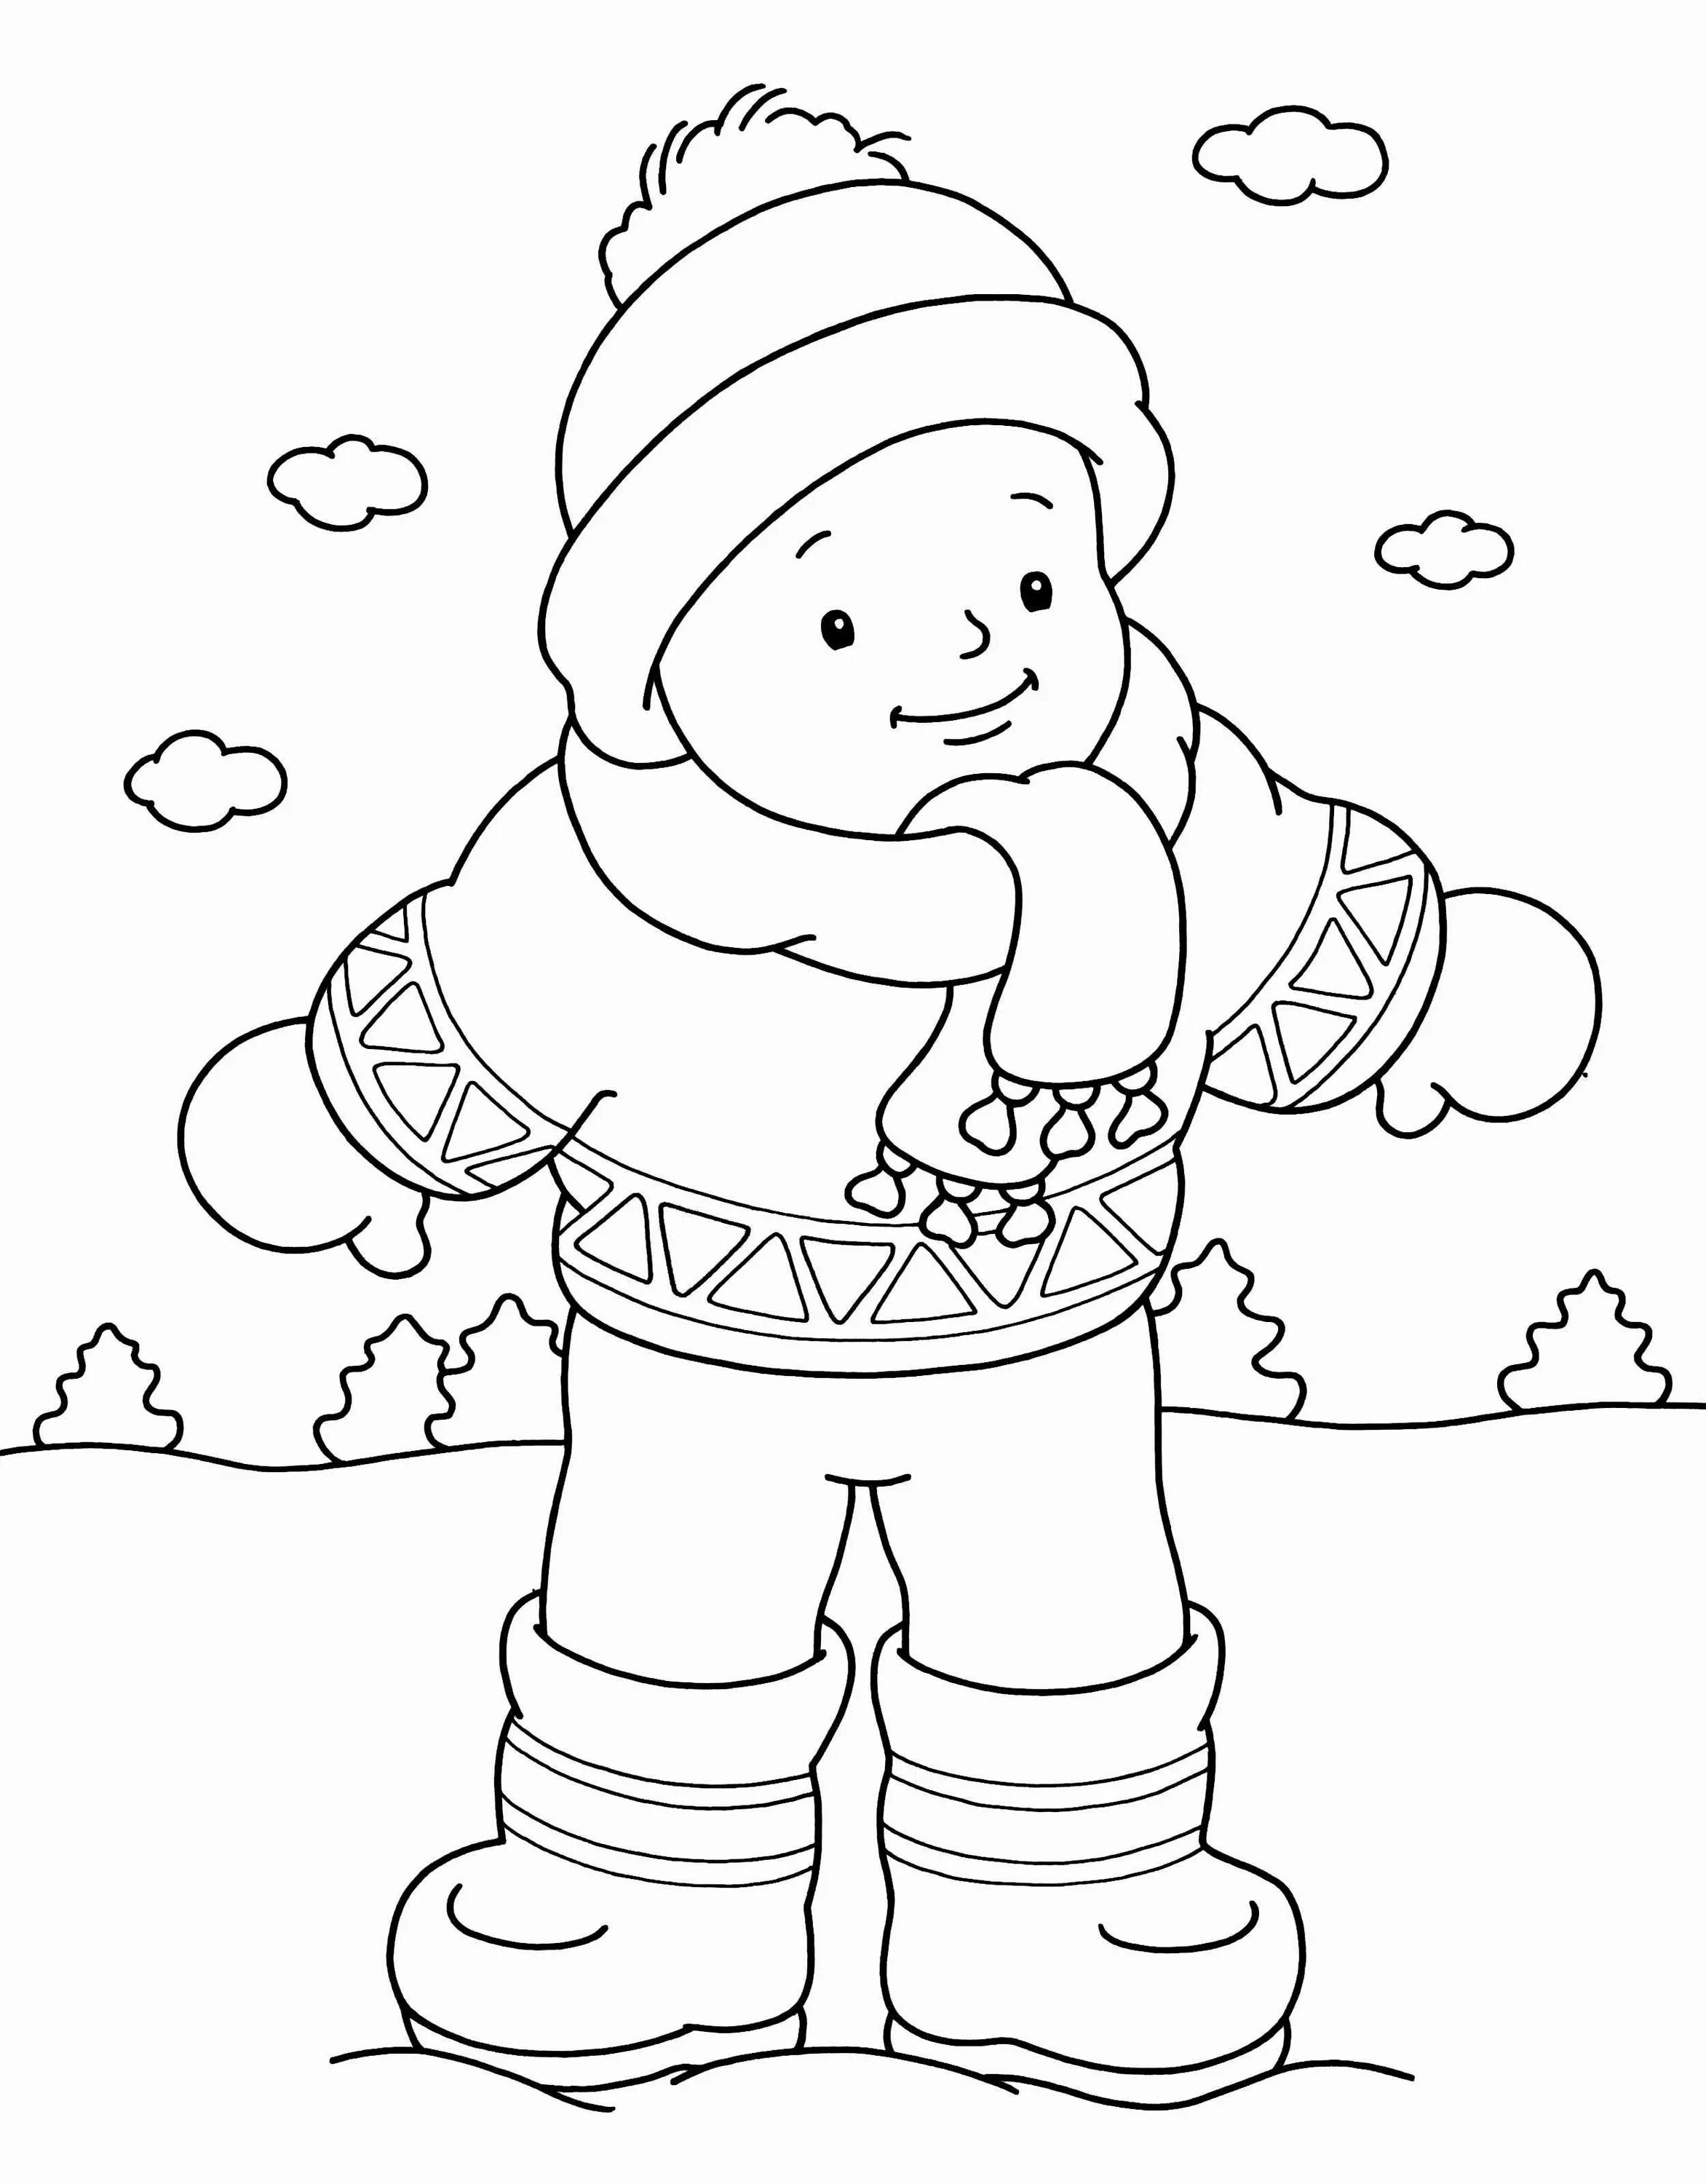 Funny winter coloring book for toddlers